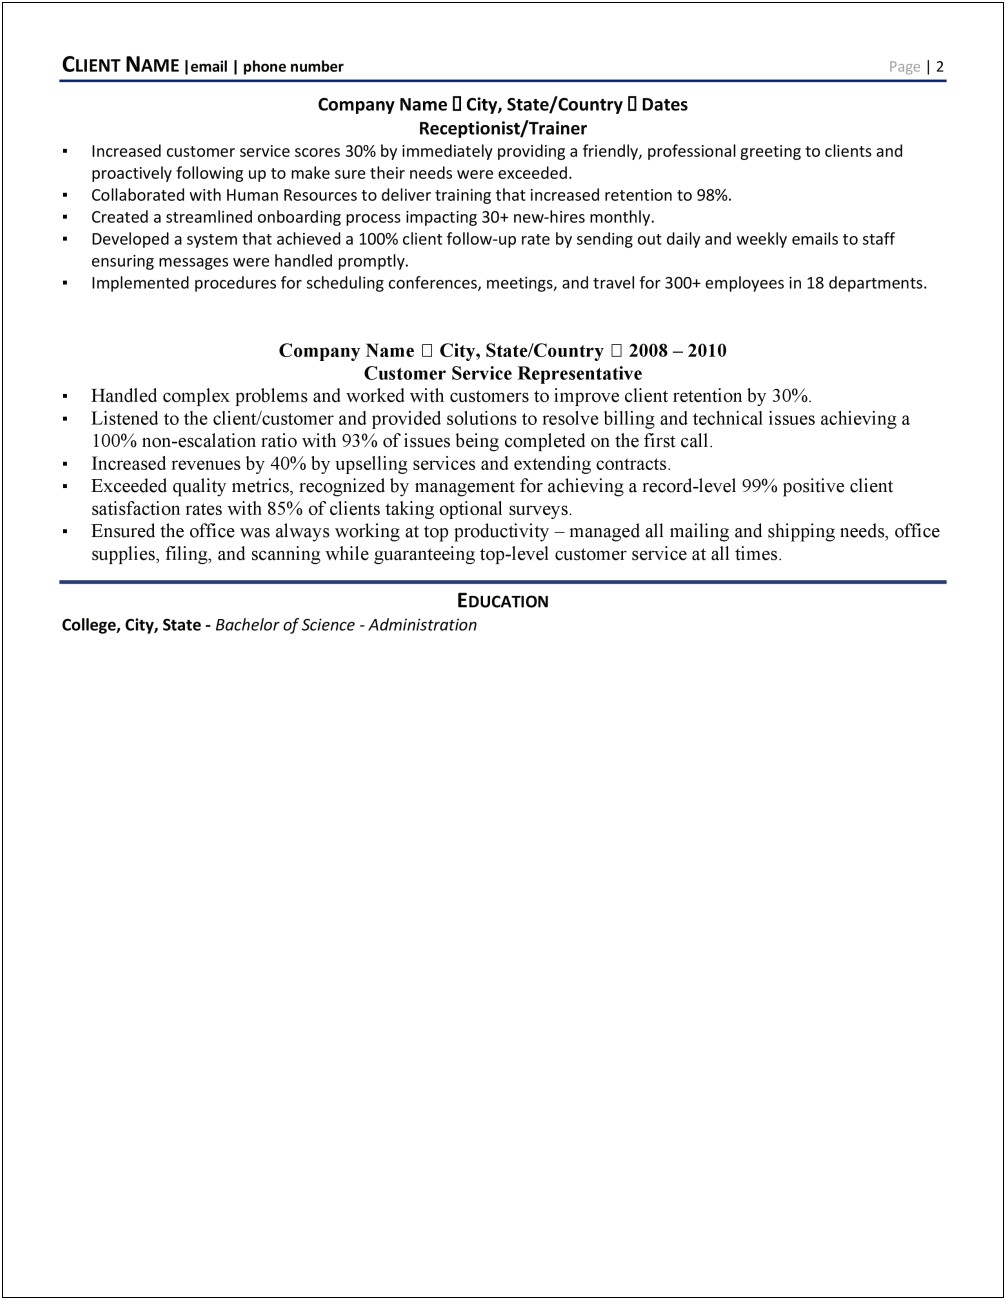 Sample Resume Objectives For Administrative Assistant Position